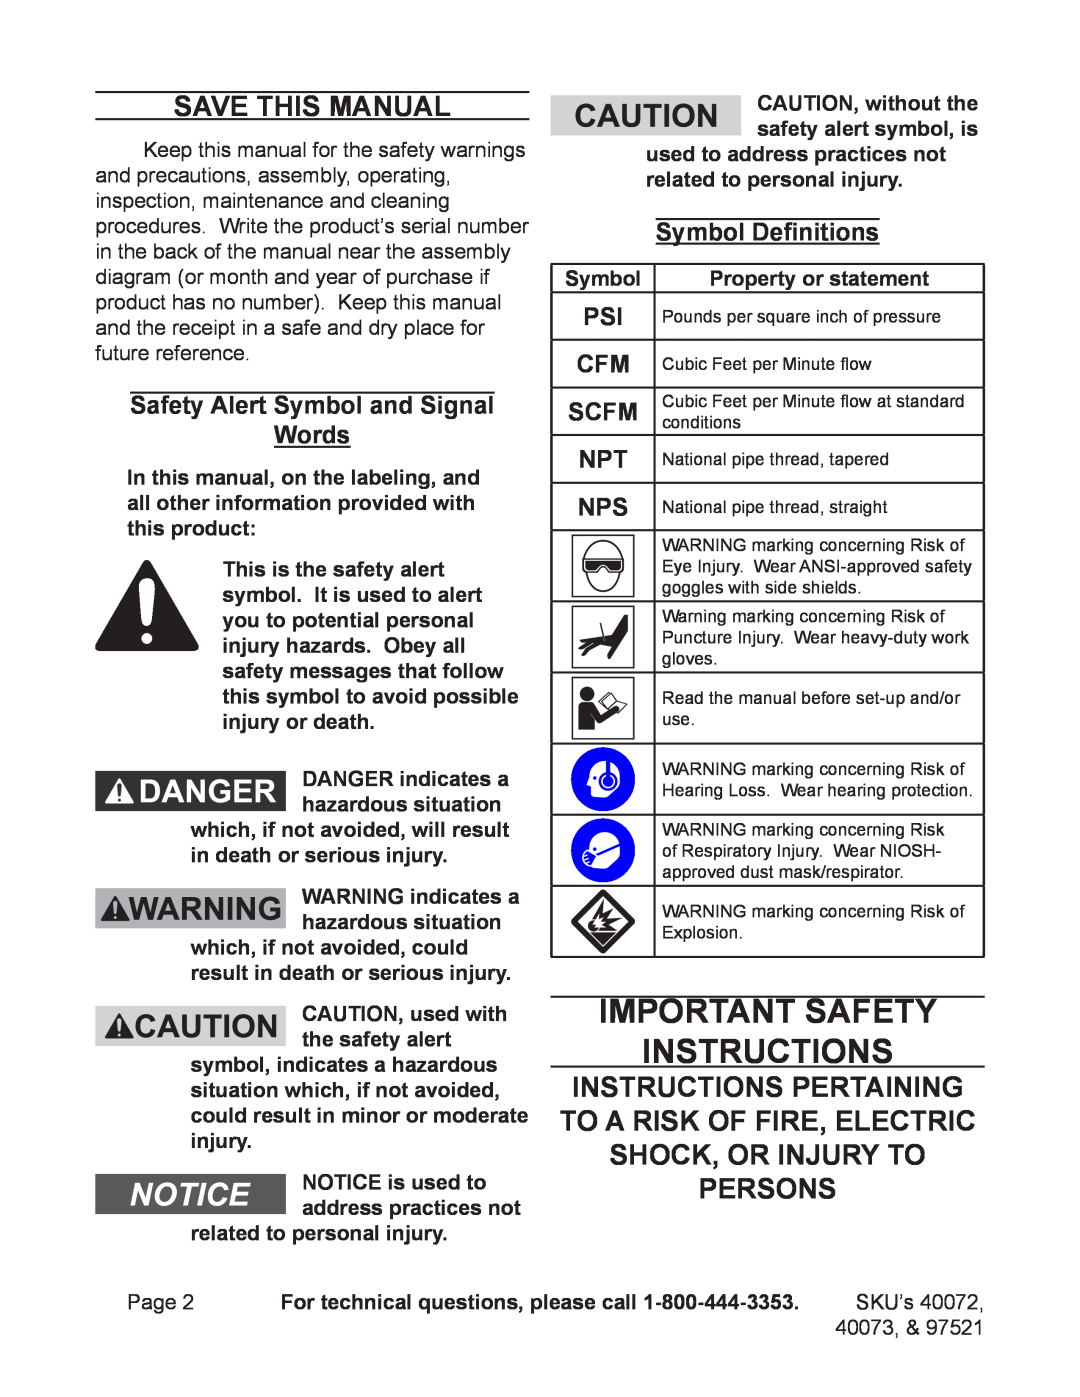 Harbor Freight Tools 40073 Important Safety Instructions, Save This Manual, Safety Alert Symbol and Signal Words, Scfm 